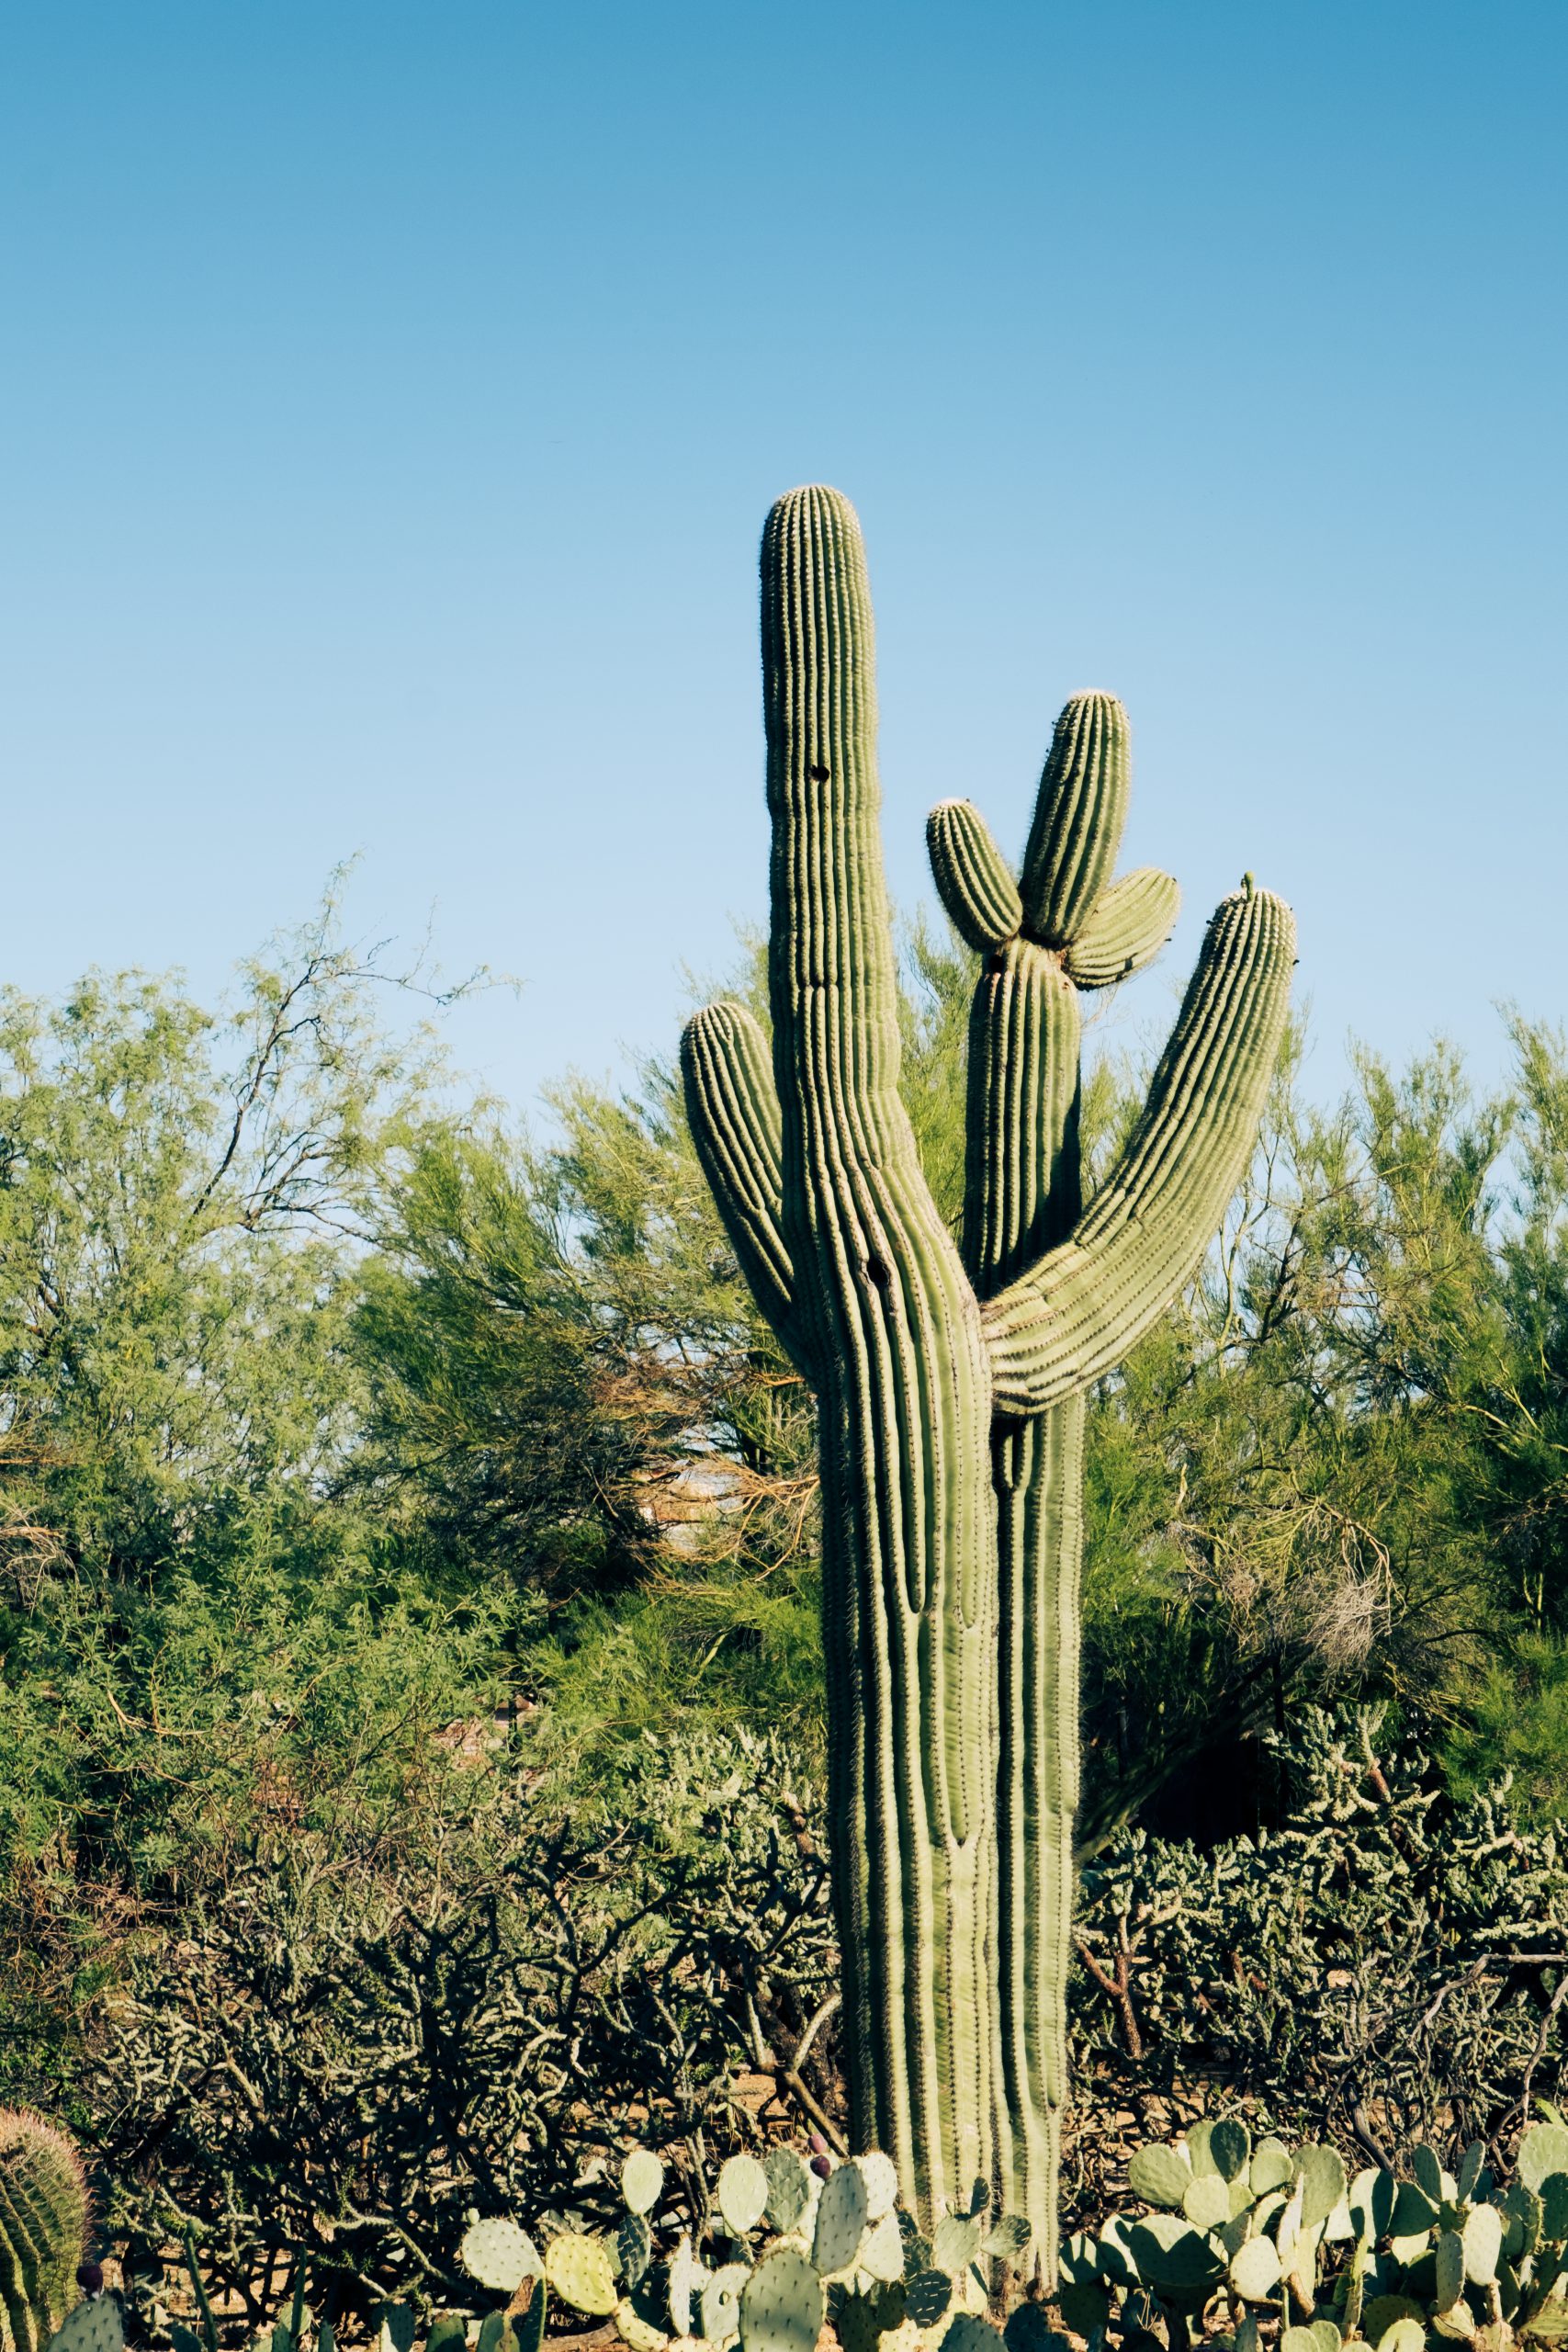 Photograph of two saguaro cacti that look like they're hugging.